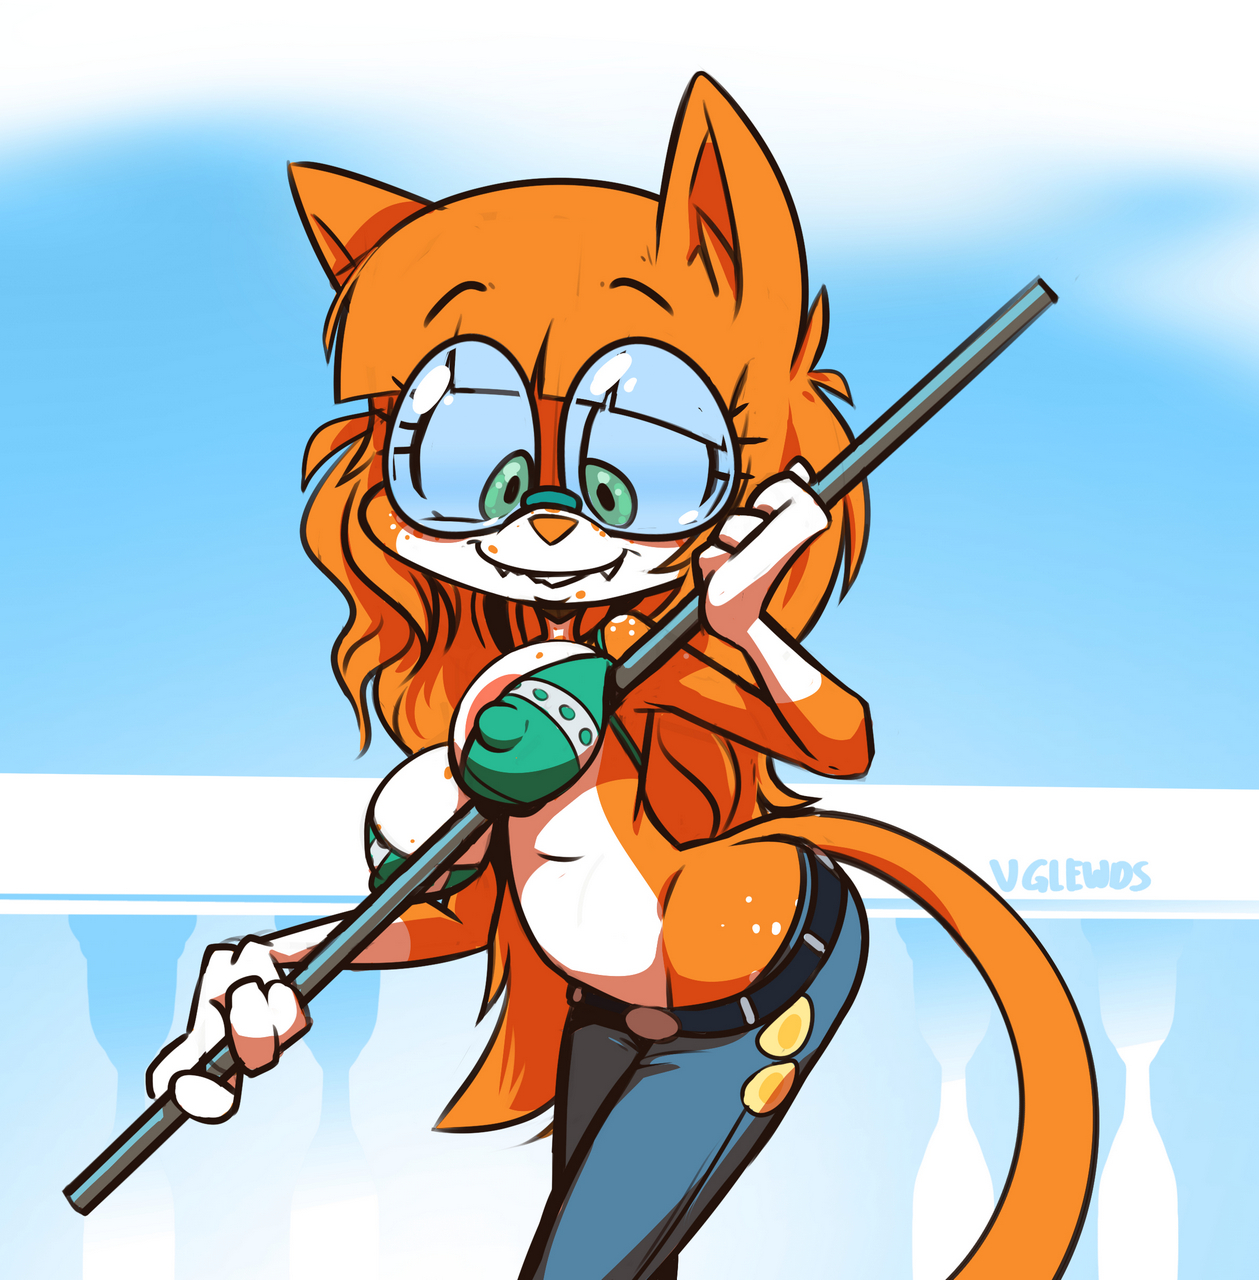 April Vg Cats Nami One Piece Webcomic Character By Scott Ramsoomair Vglewd